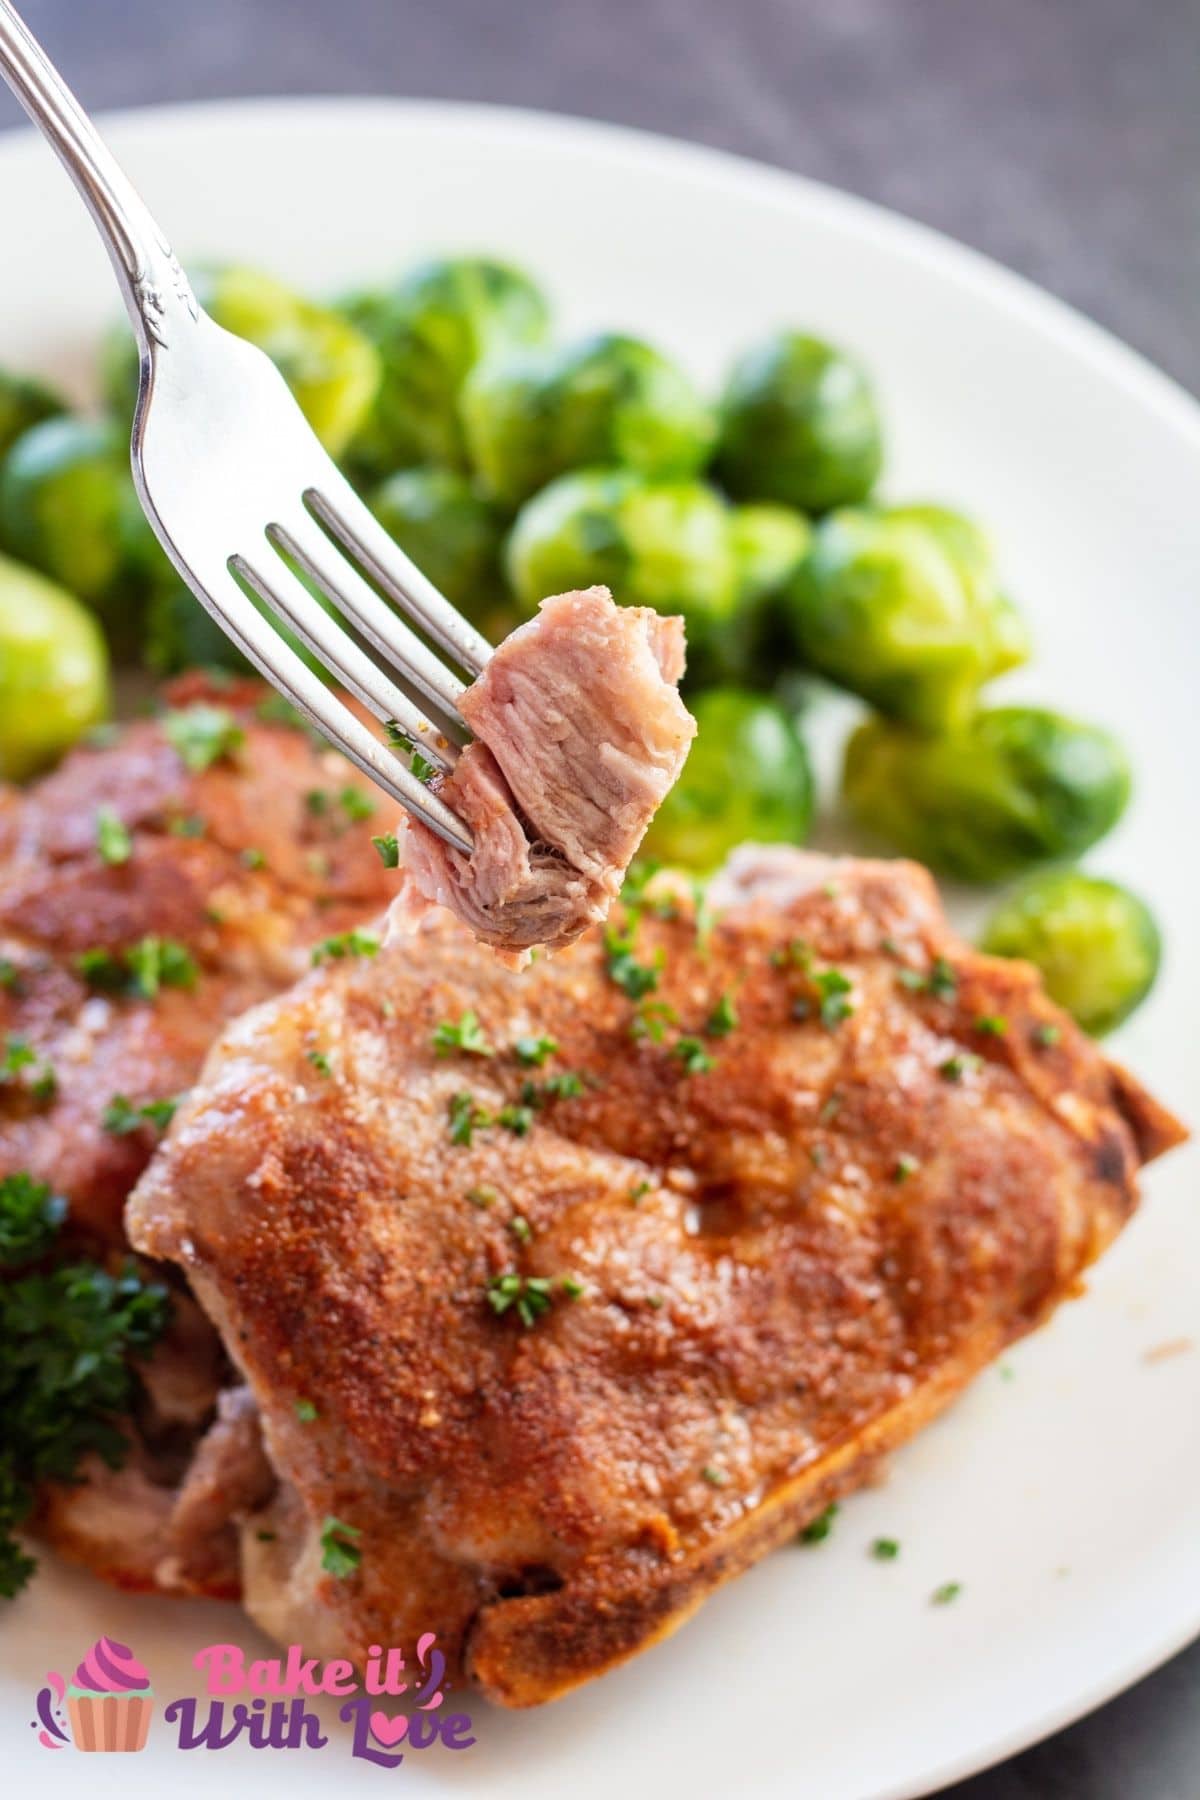 Tall image of country style pork loin chops on a white plate.